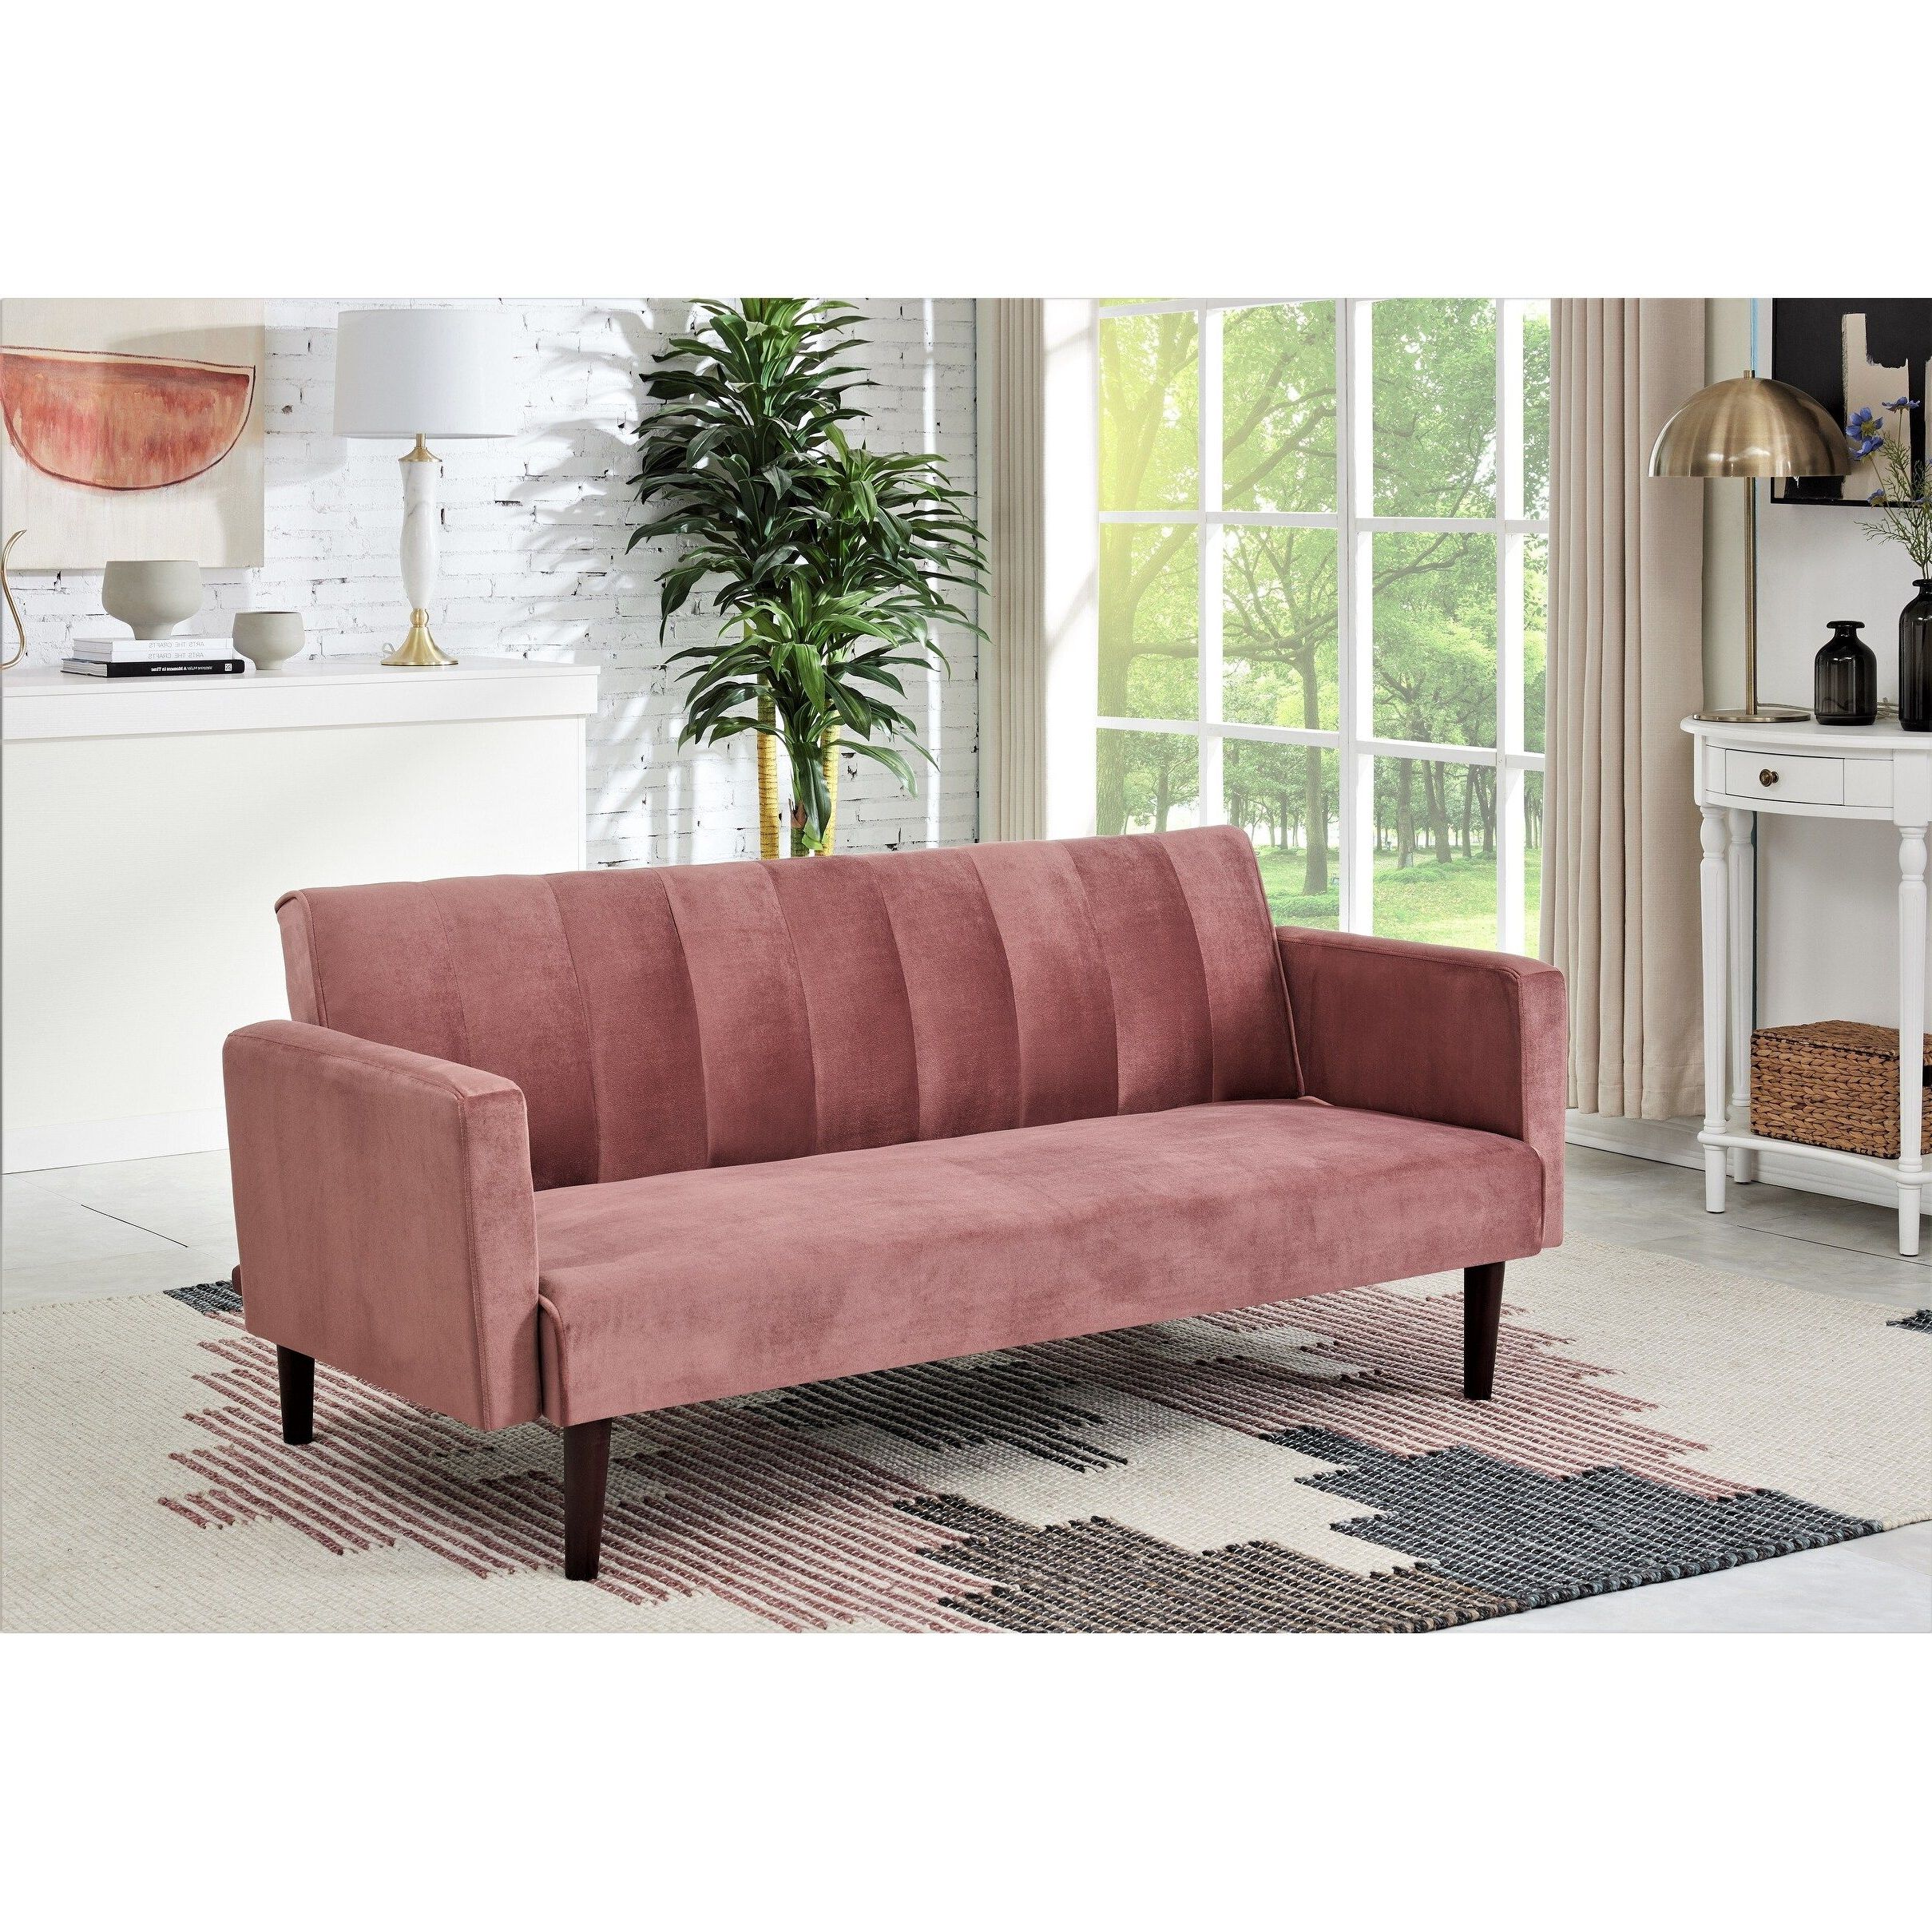 Well Known Container Furniture Srtip Convertible Velvet Sofa Bed – Overstock Within 66" Convertible Velvet Sofa Beds (View 4 of 15)